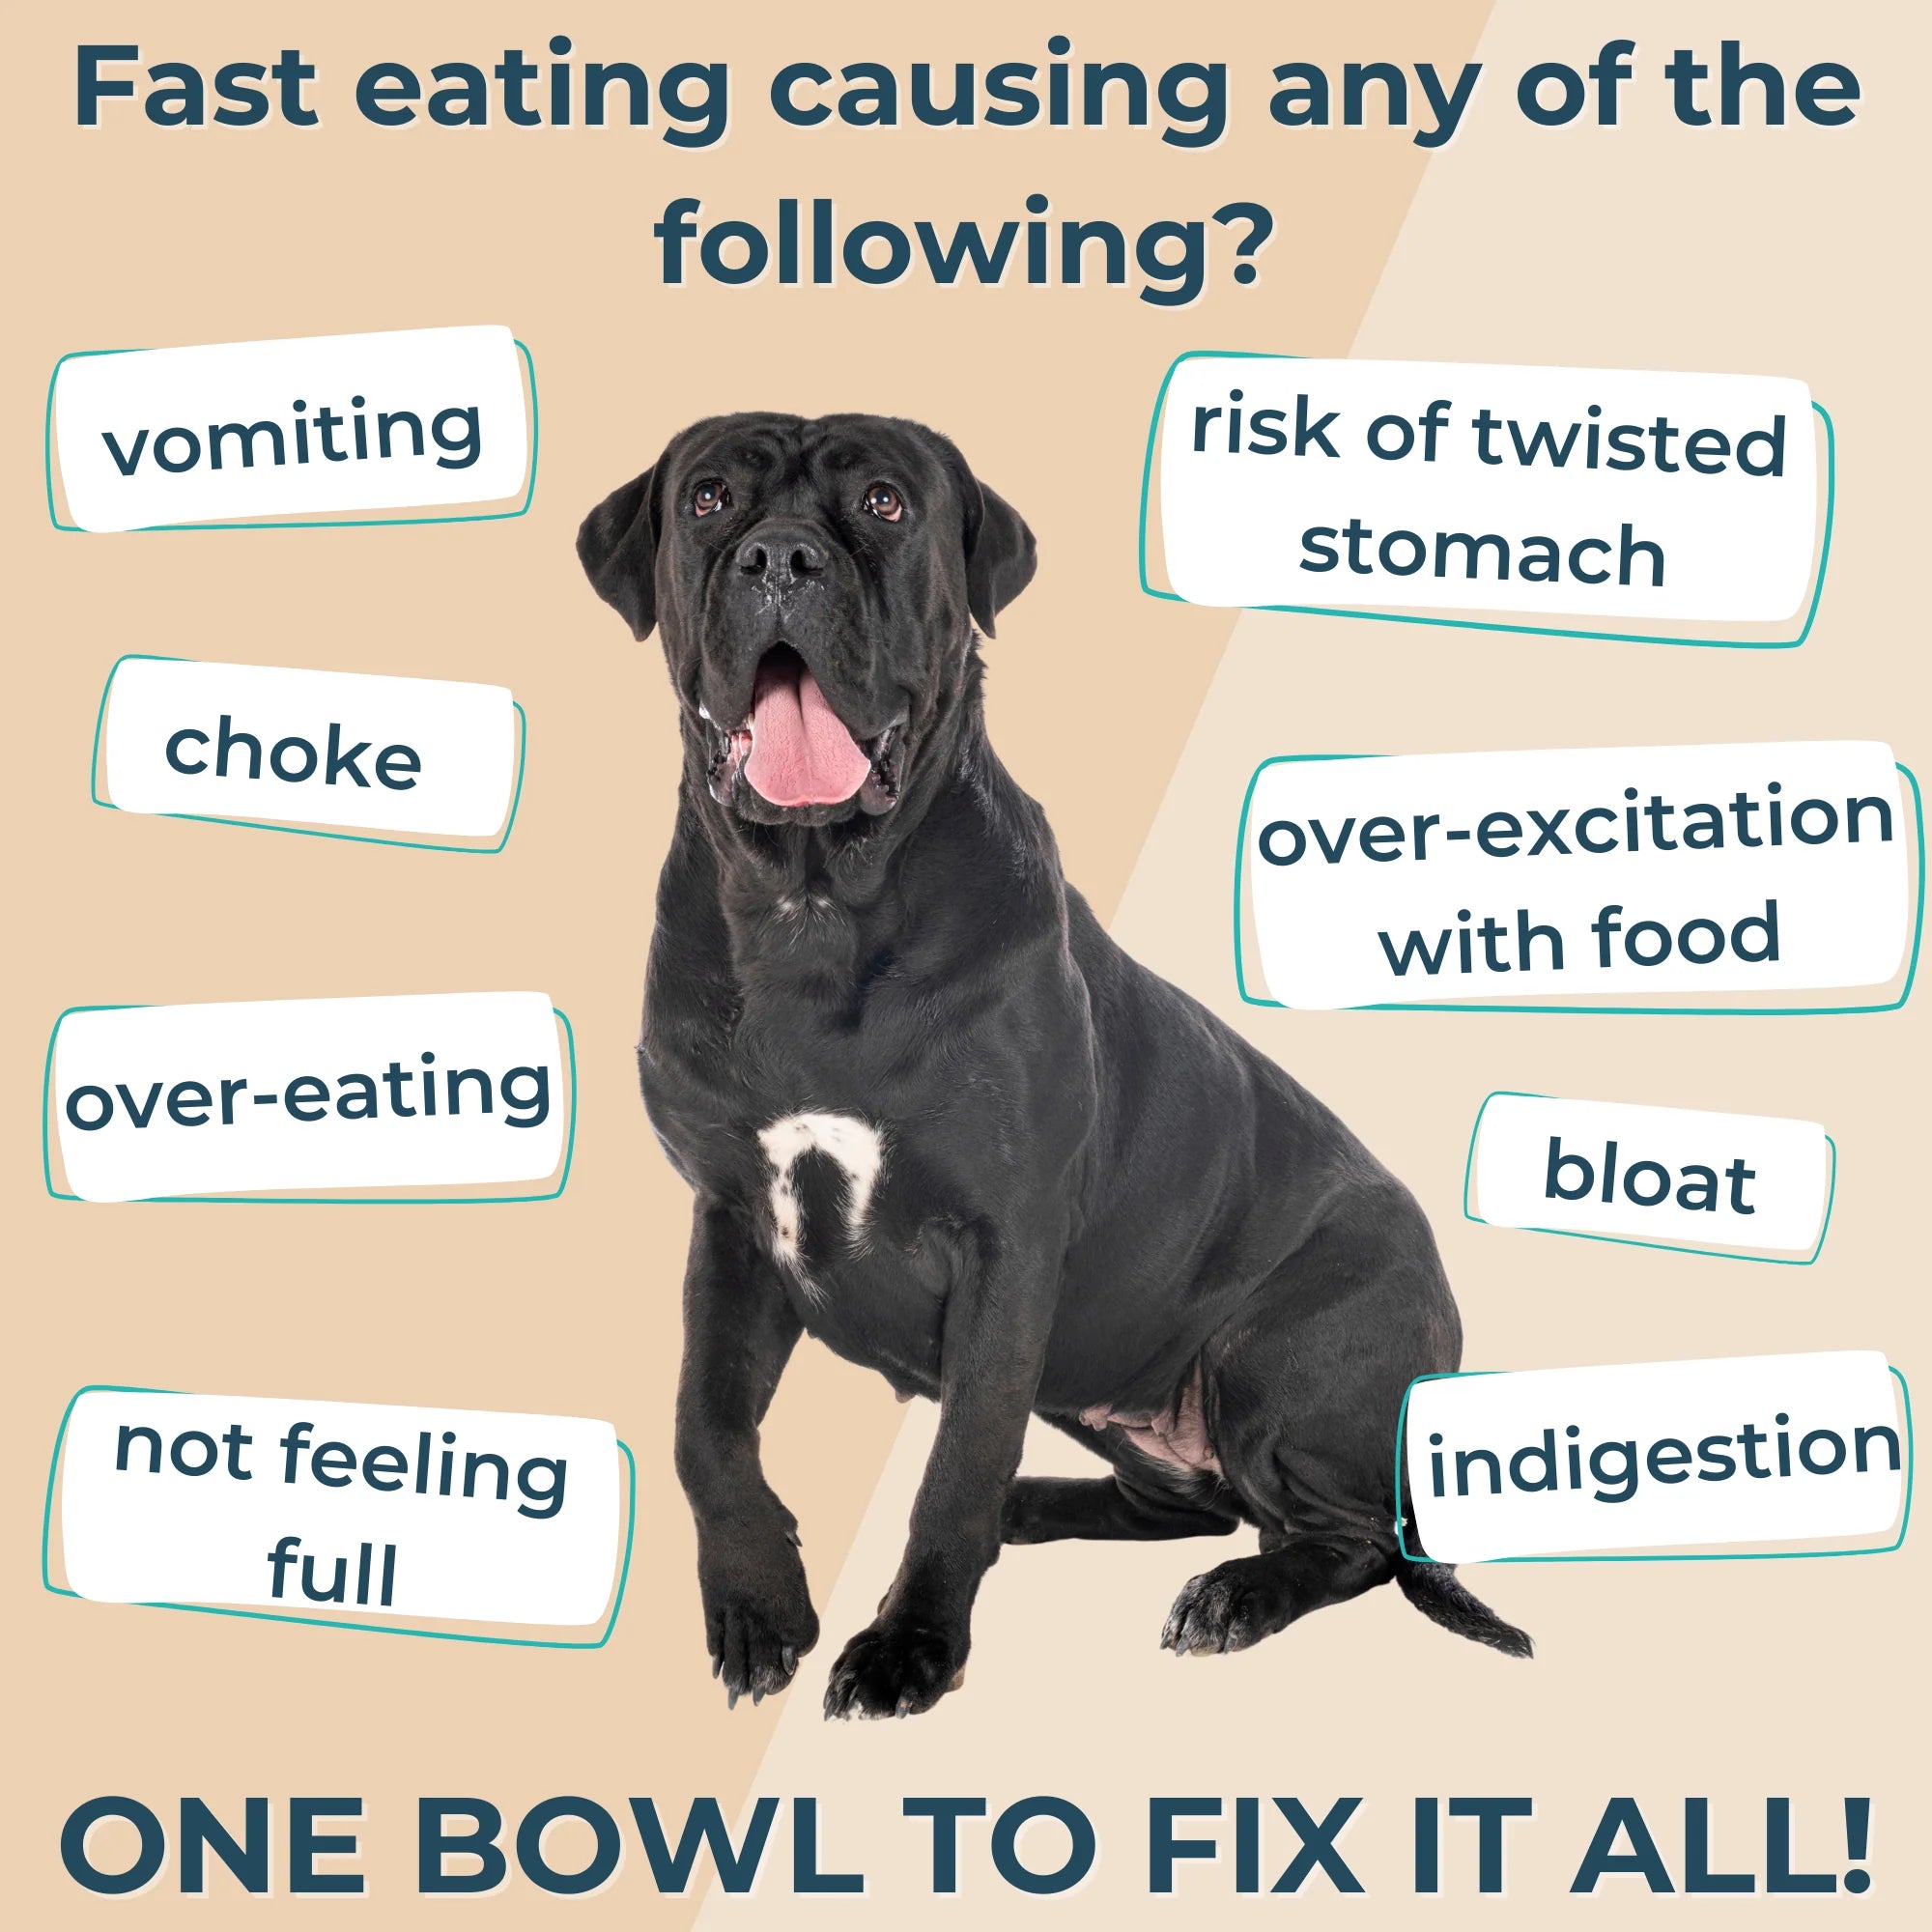 An infographic showing symptoms of fast eating in dogs